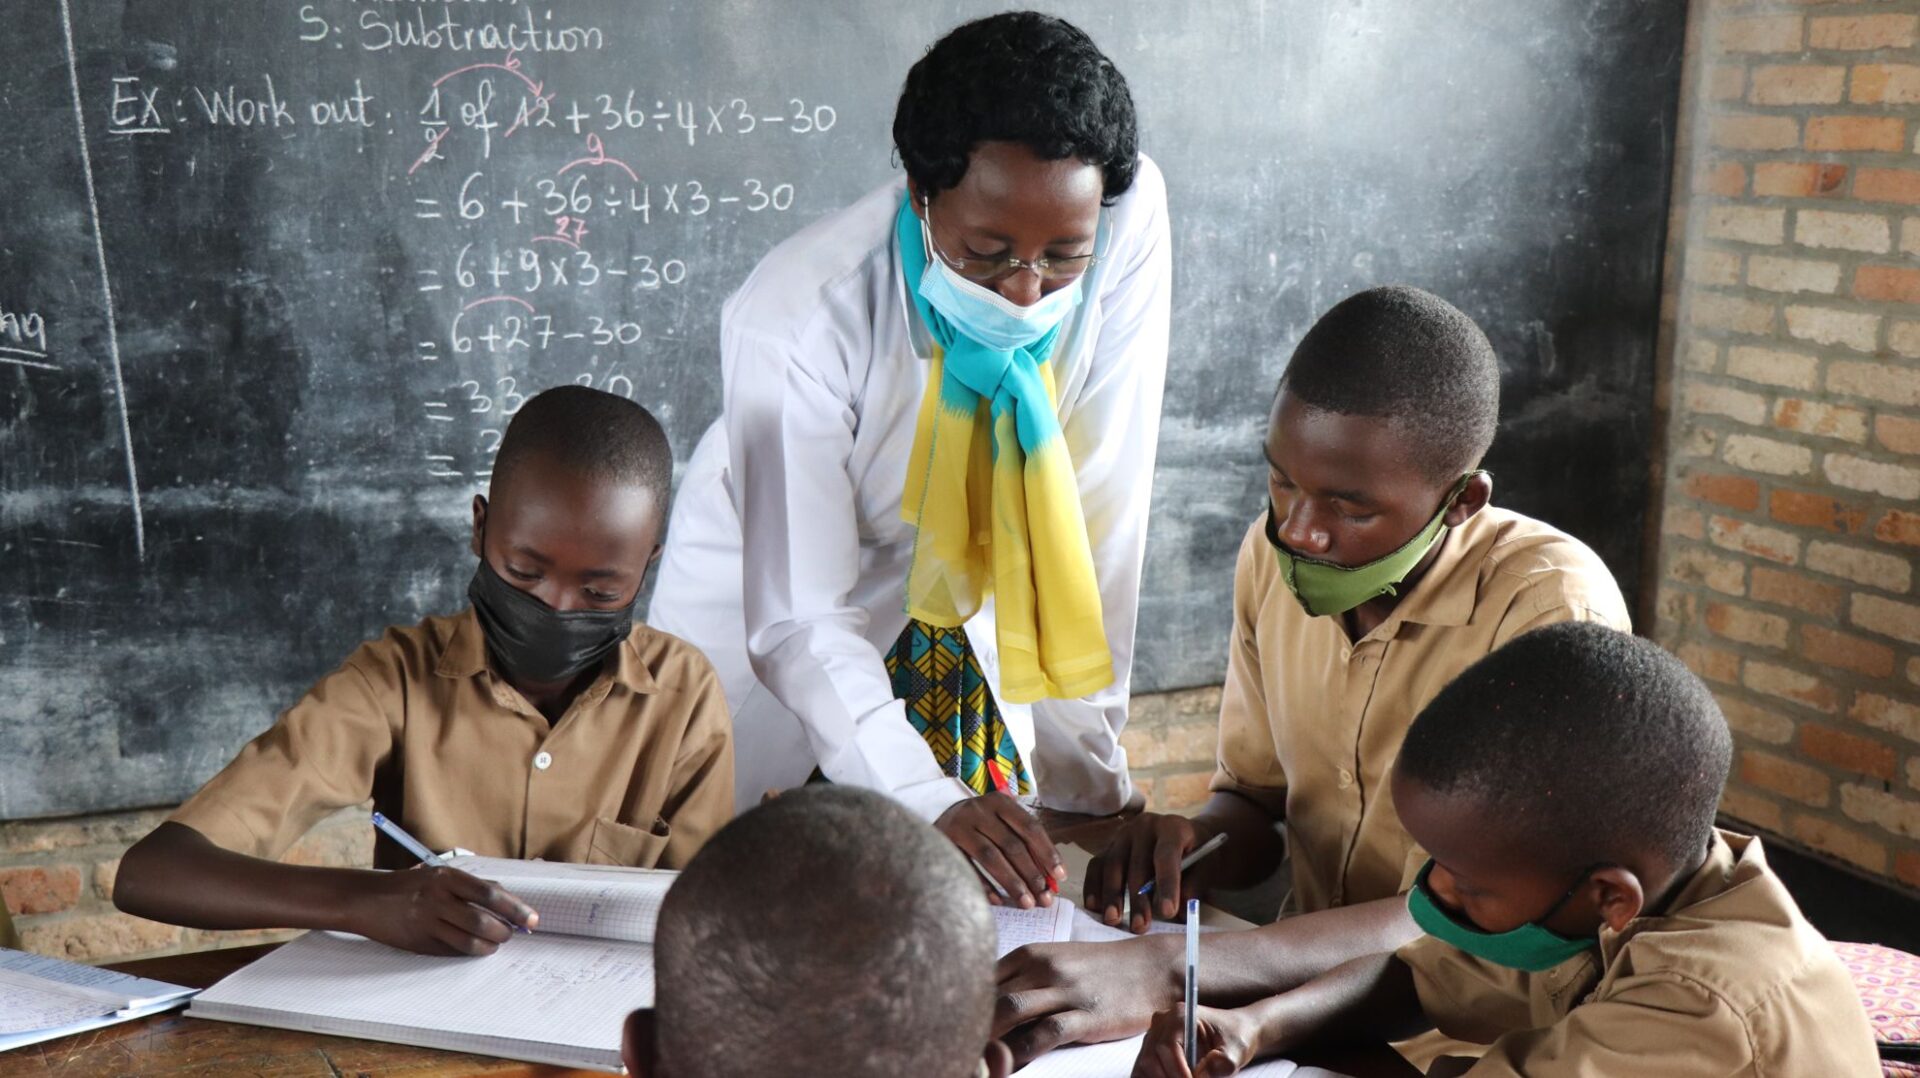 A teacher trained by VVOB as part of Leaders in Teaching organizes her students into groups